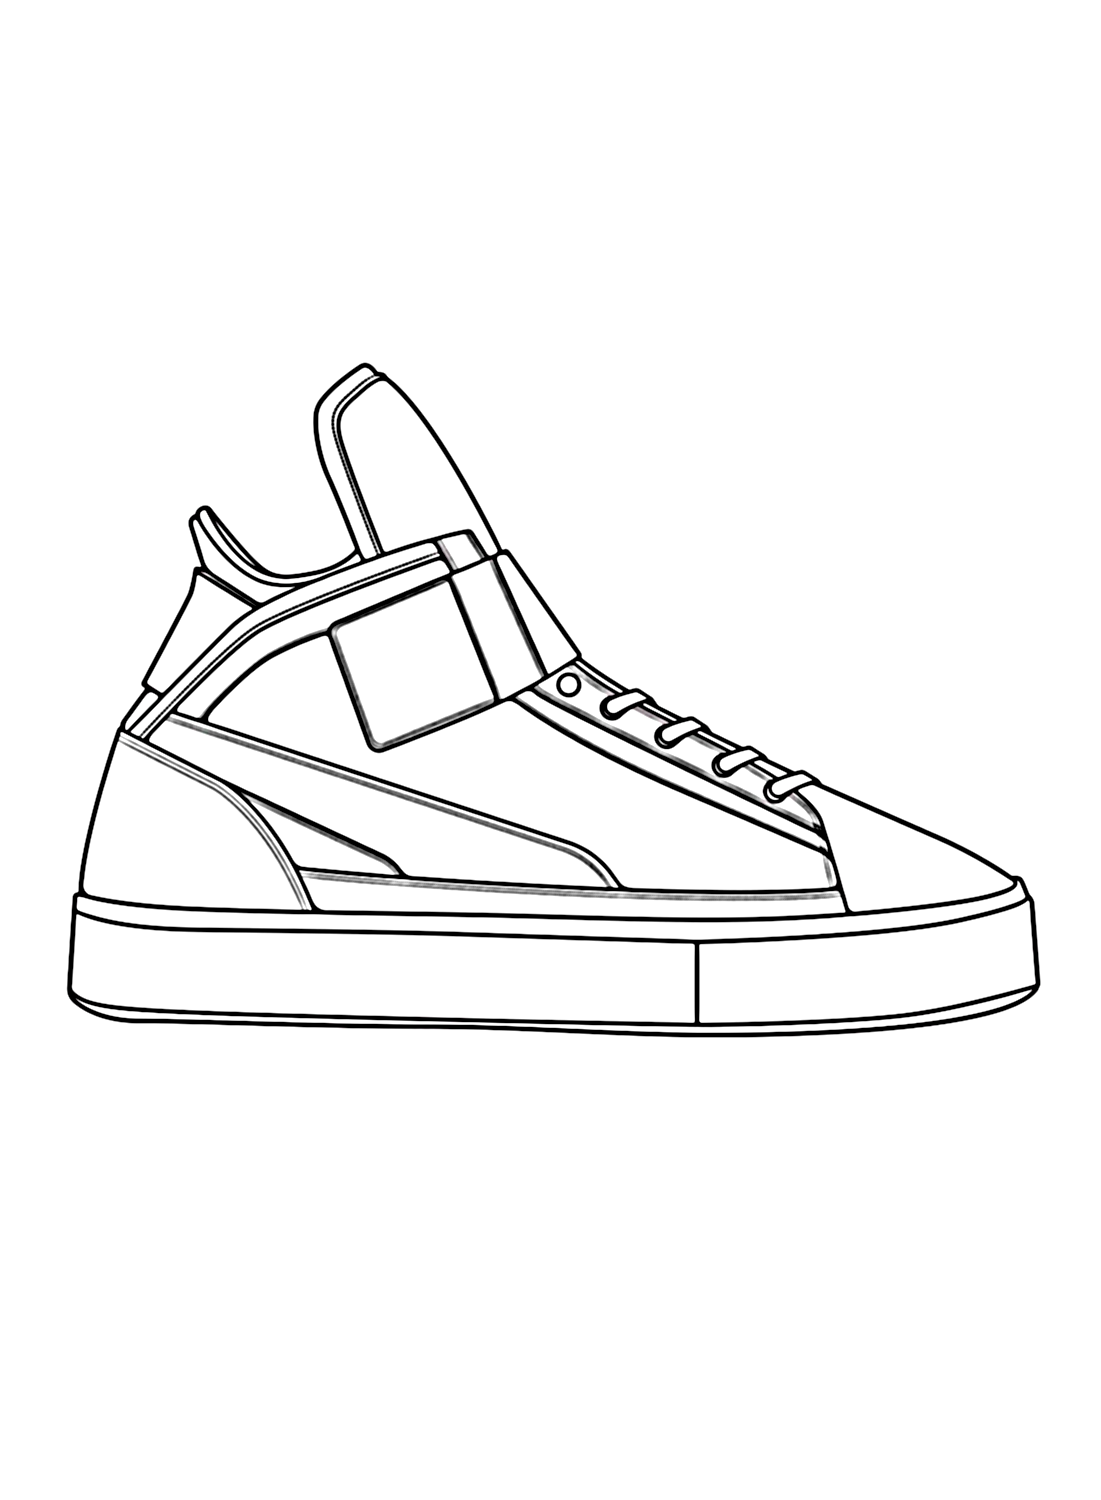 Sneaker coloring page